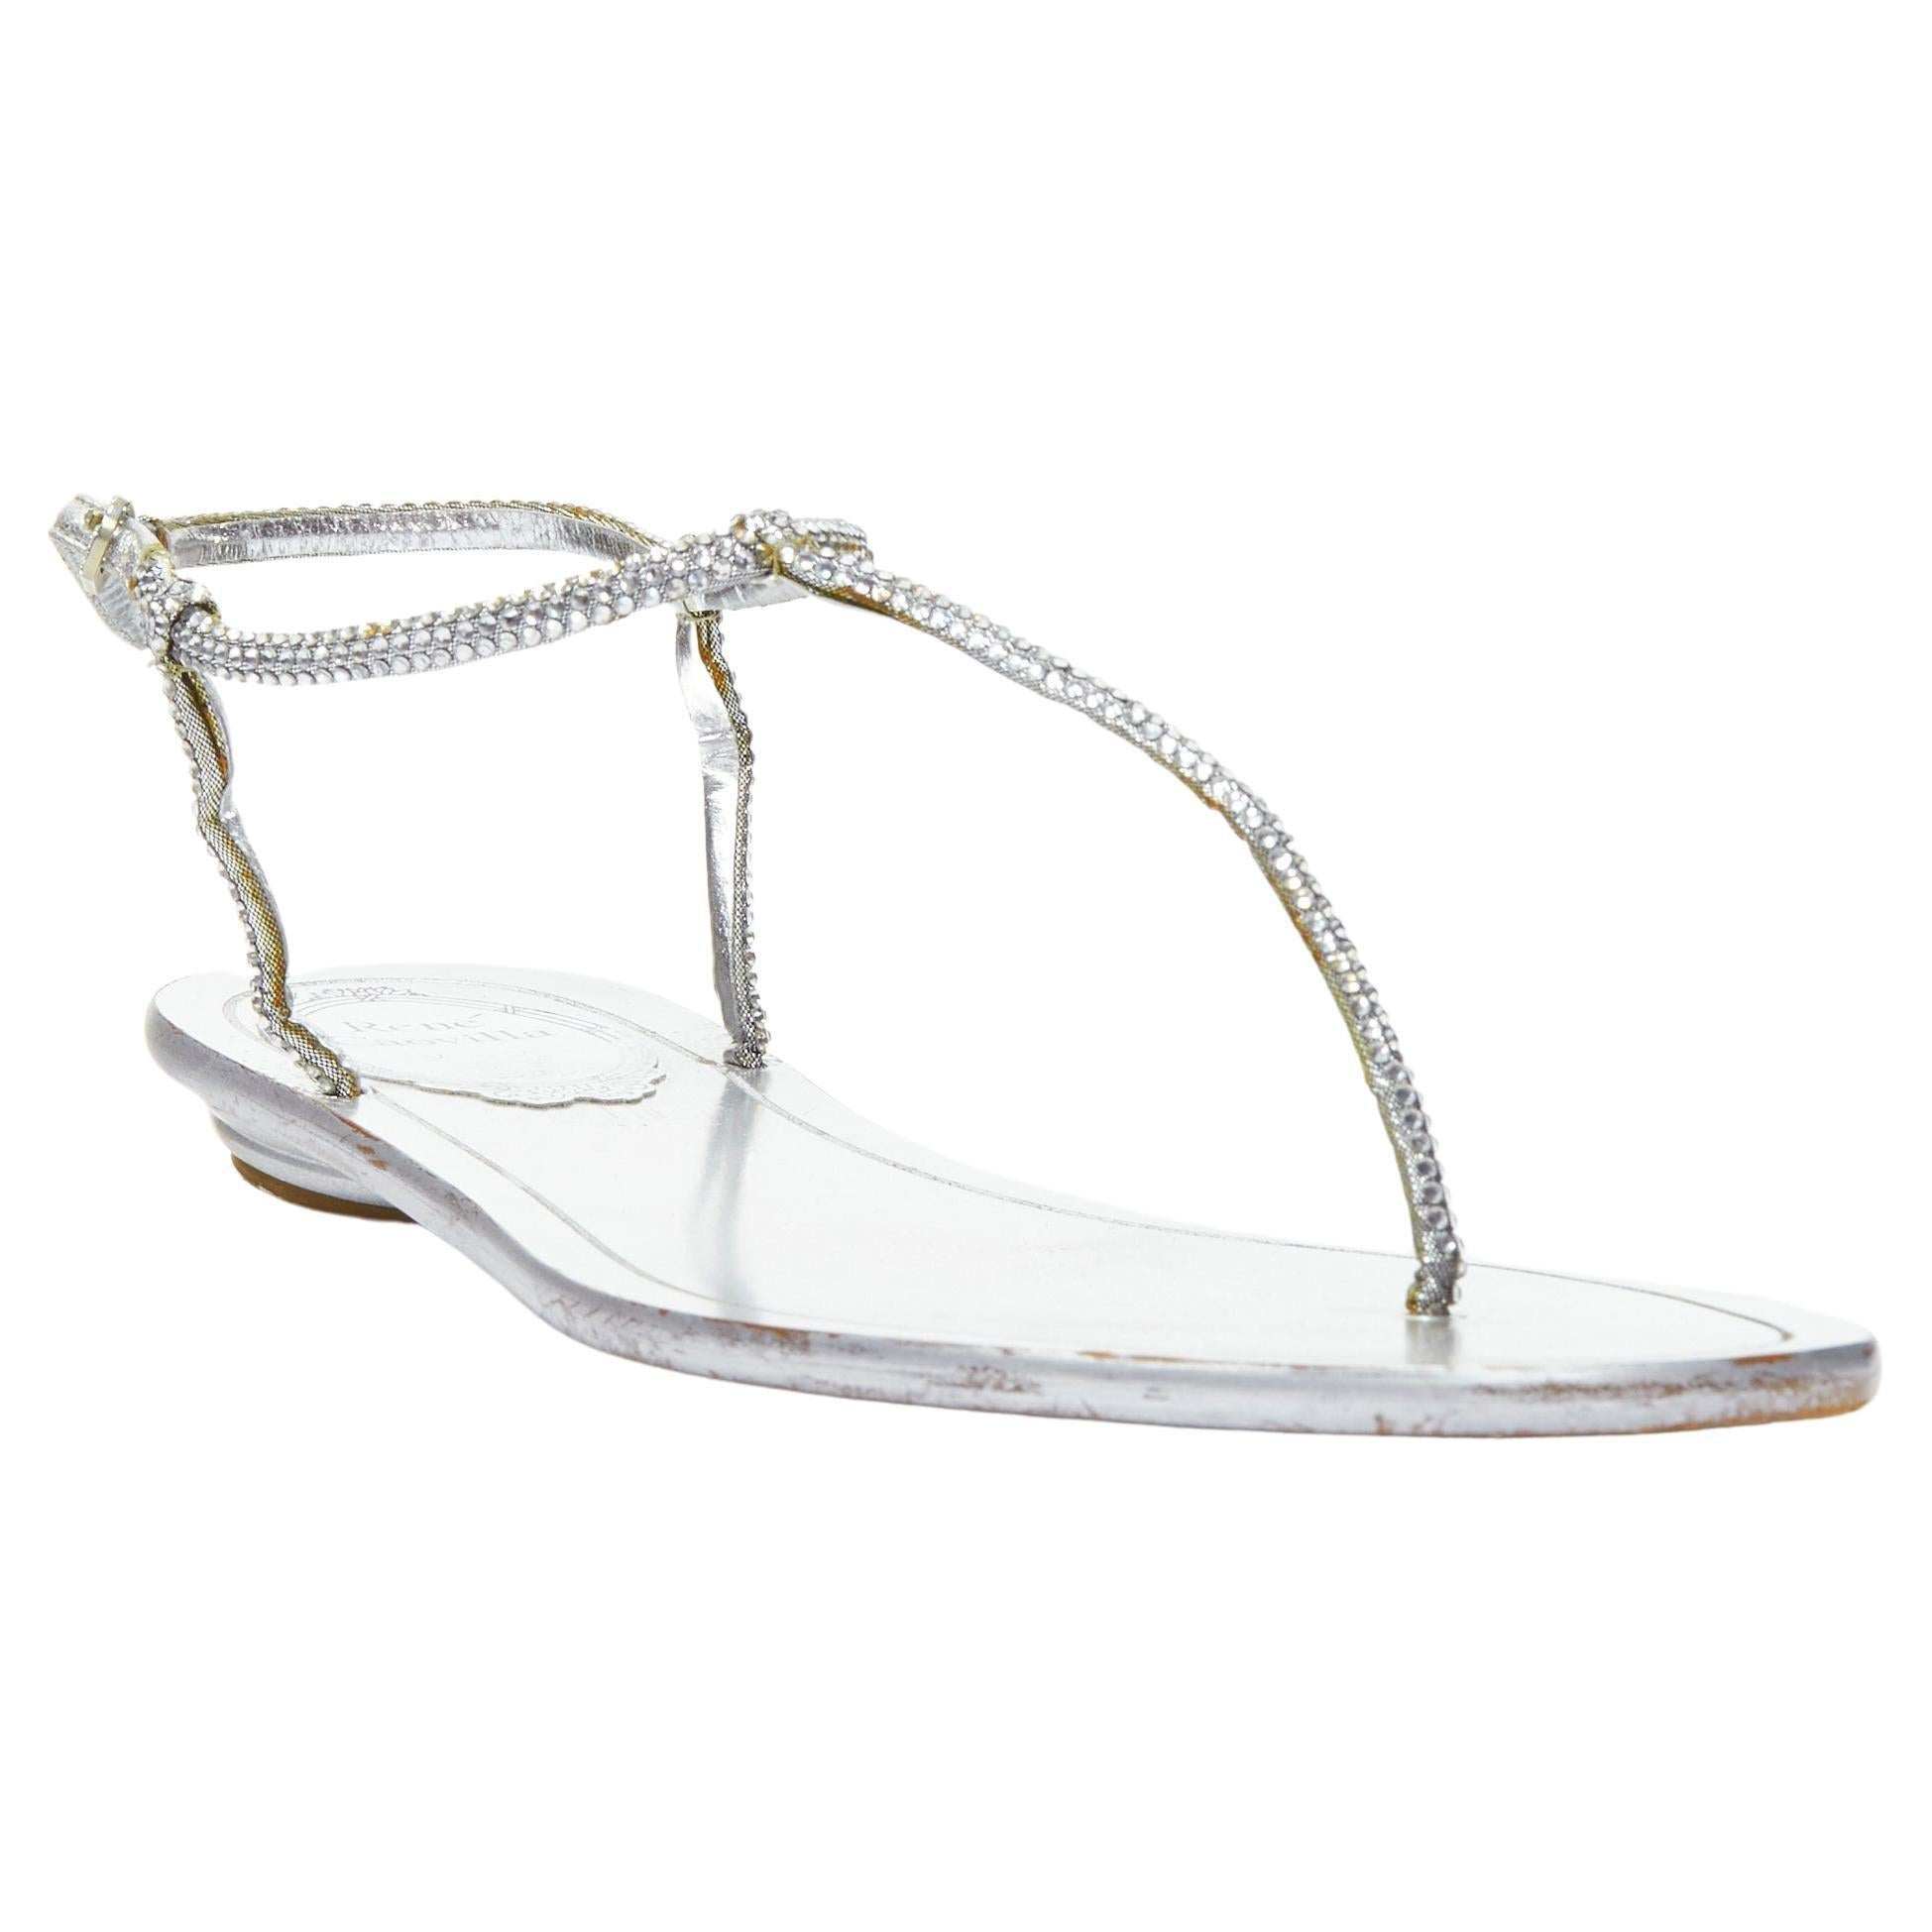 RENE CAOVILLA silver strass rhinestone T-strap flat thong sandals EU36 
Reference: MELK/A00215 
Brand: Rene Caovilla 
Material: Leather 
Color: Silver 
Pattern: Solid 
Closure: BUckle 
Made in: Italy 

CONDITION: 
Condition: Good, this item was